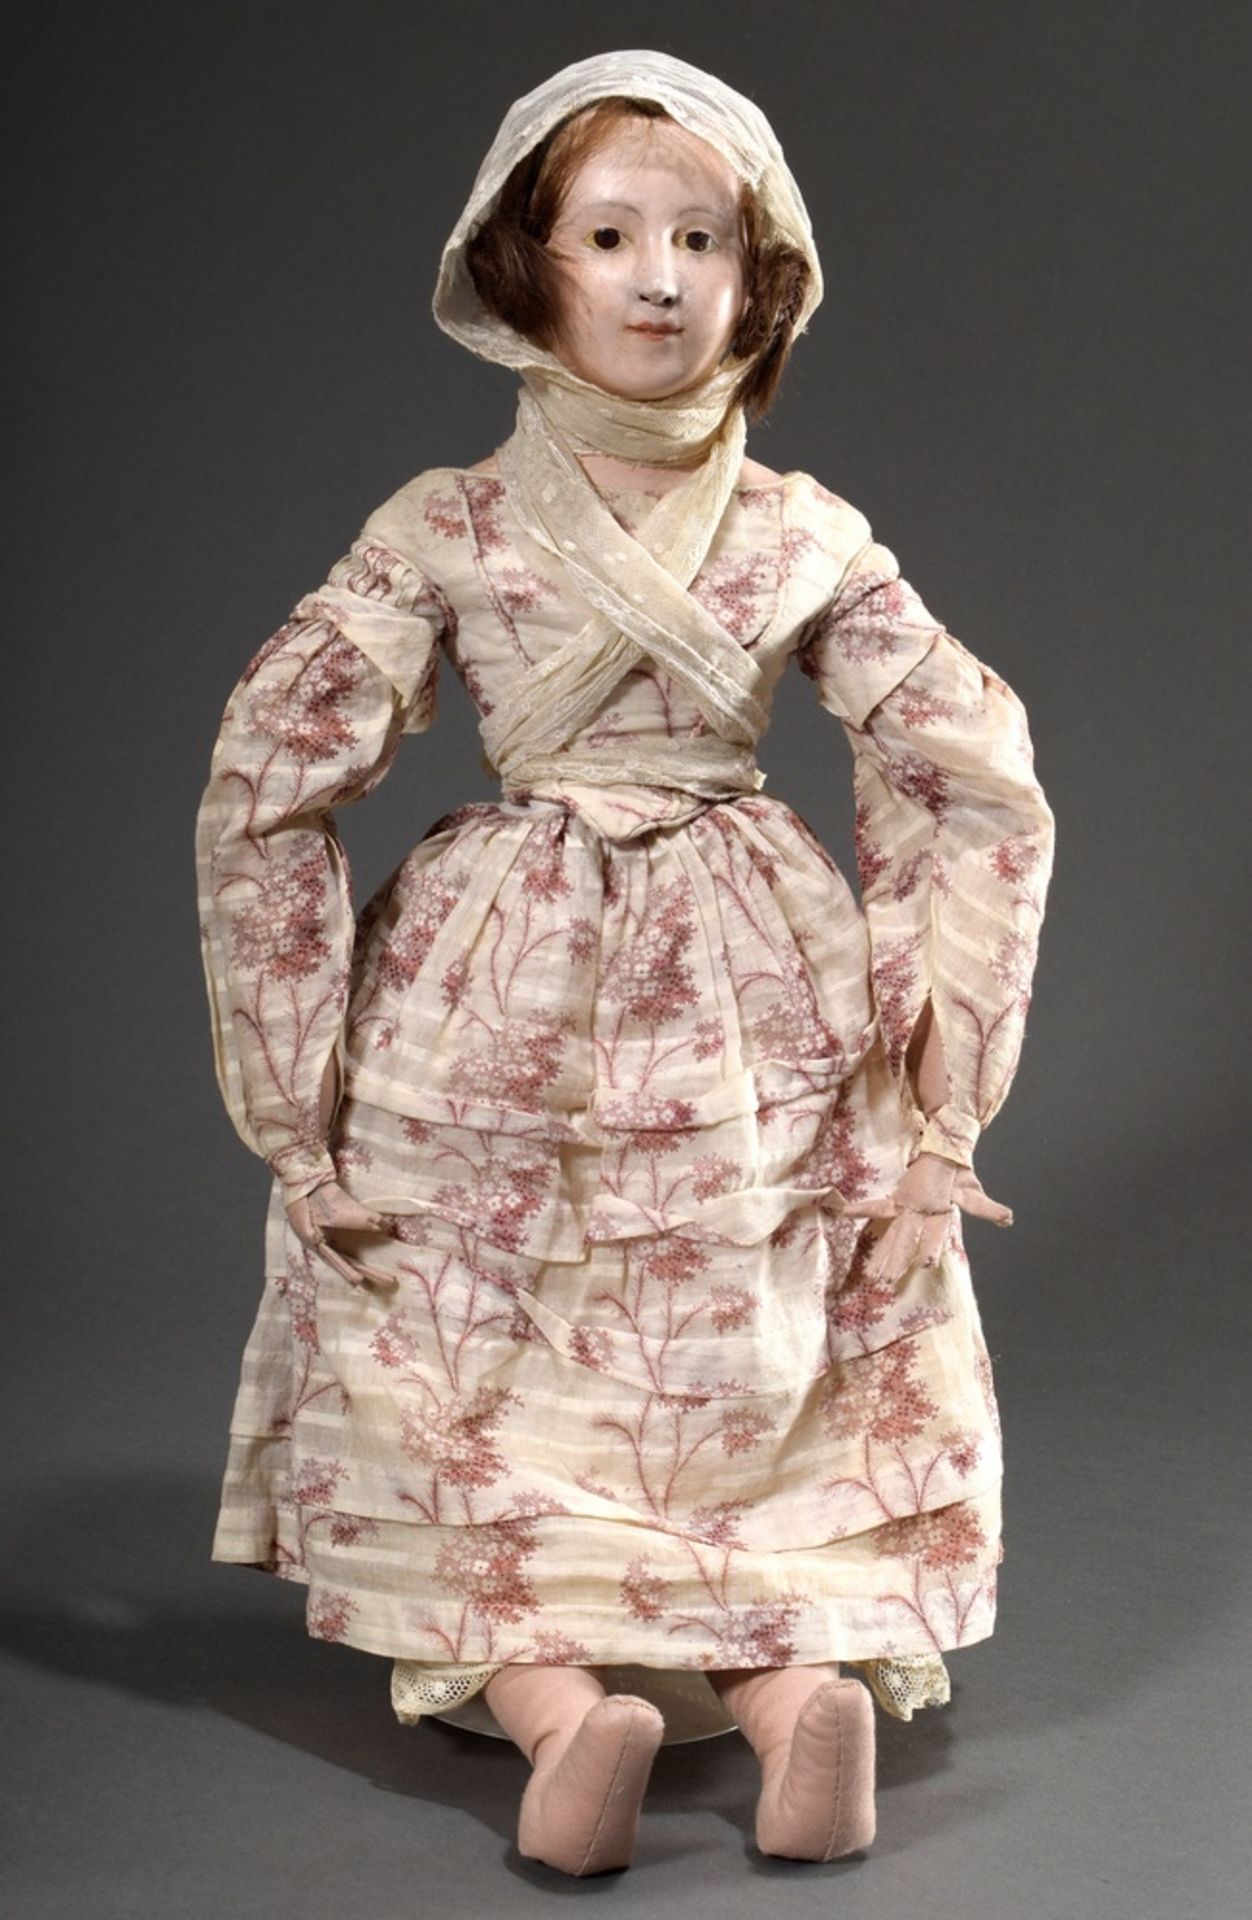 Early Biedermeier doll with papier-mâché breasthead, real hair and brown eyes, original clothing, c